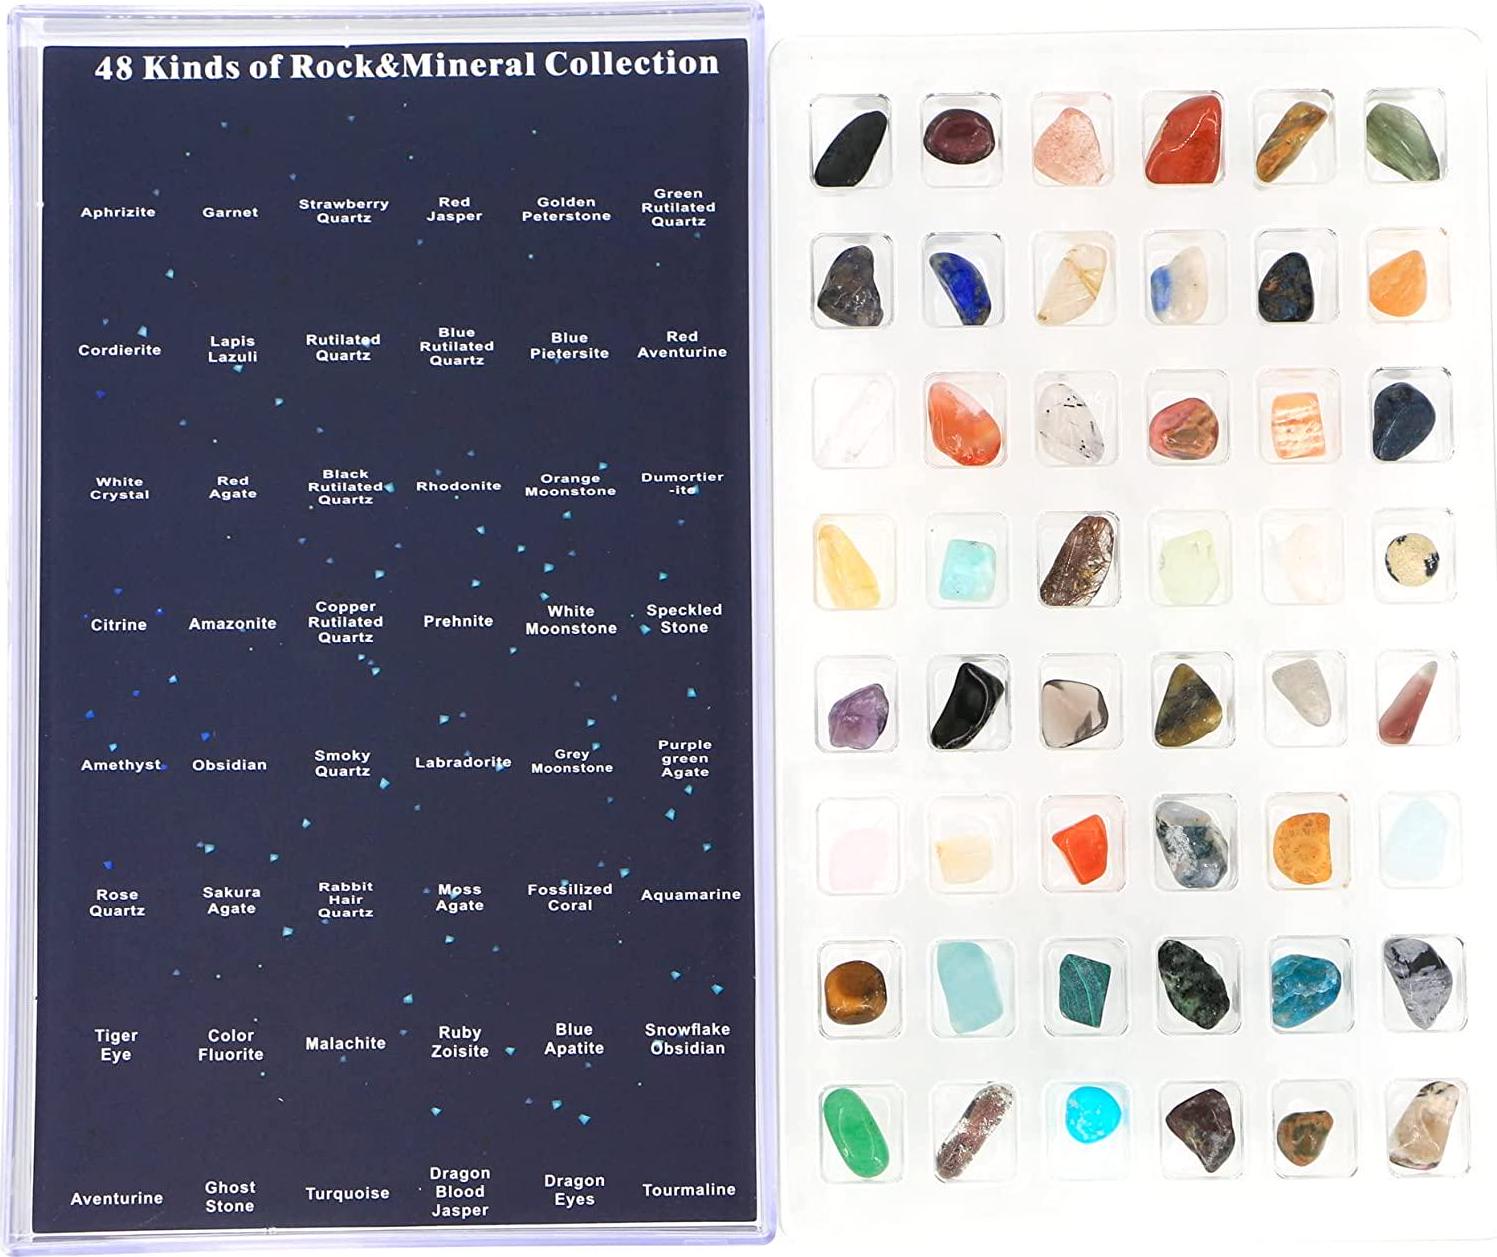 VWMYQ, Mineral&Gems Collection Geology Educational Kit for Kids,Children's Natural Science Education kits-48 Pieces with Clear Rock Display Case,Healing Chakra Gemstones,Crystal,Jasper Stone